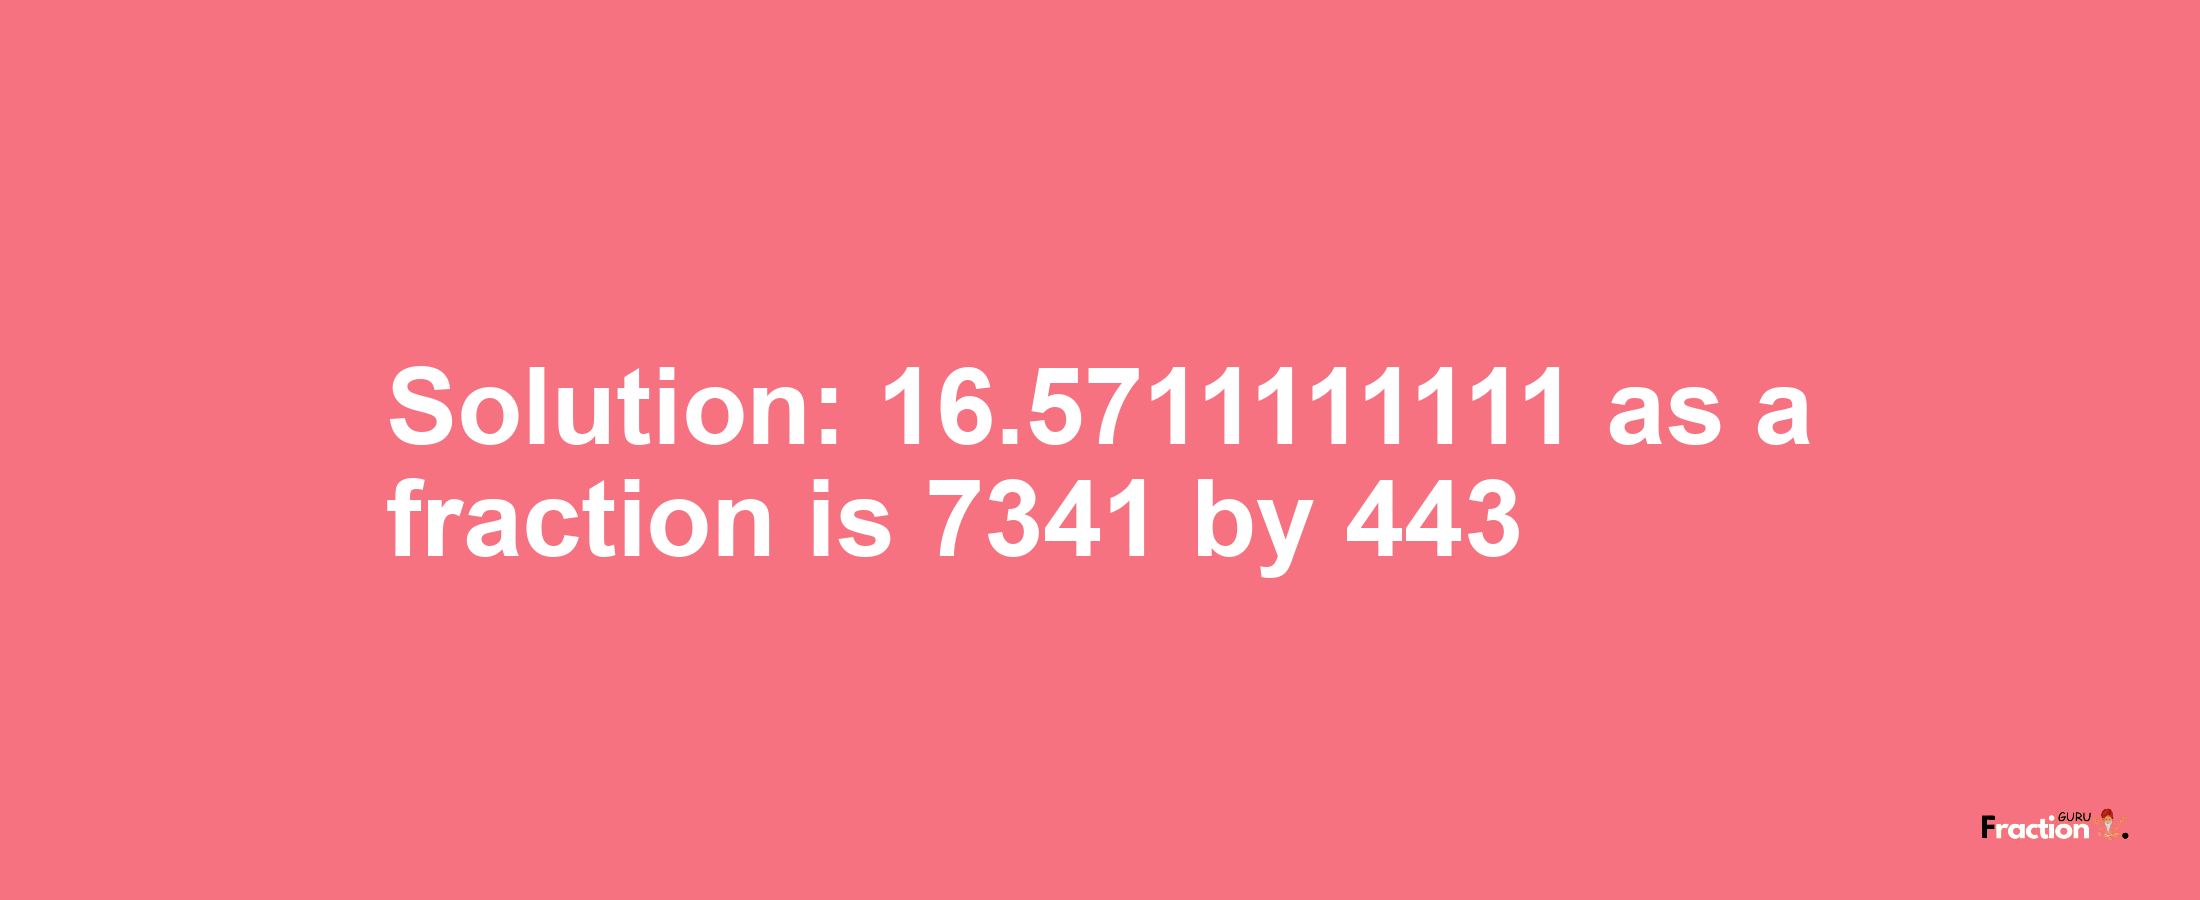 Solution:16.5711111111 as a fraction is 7341/443